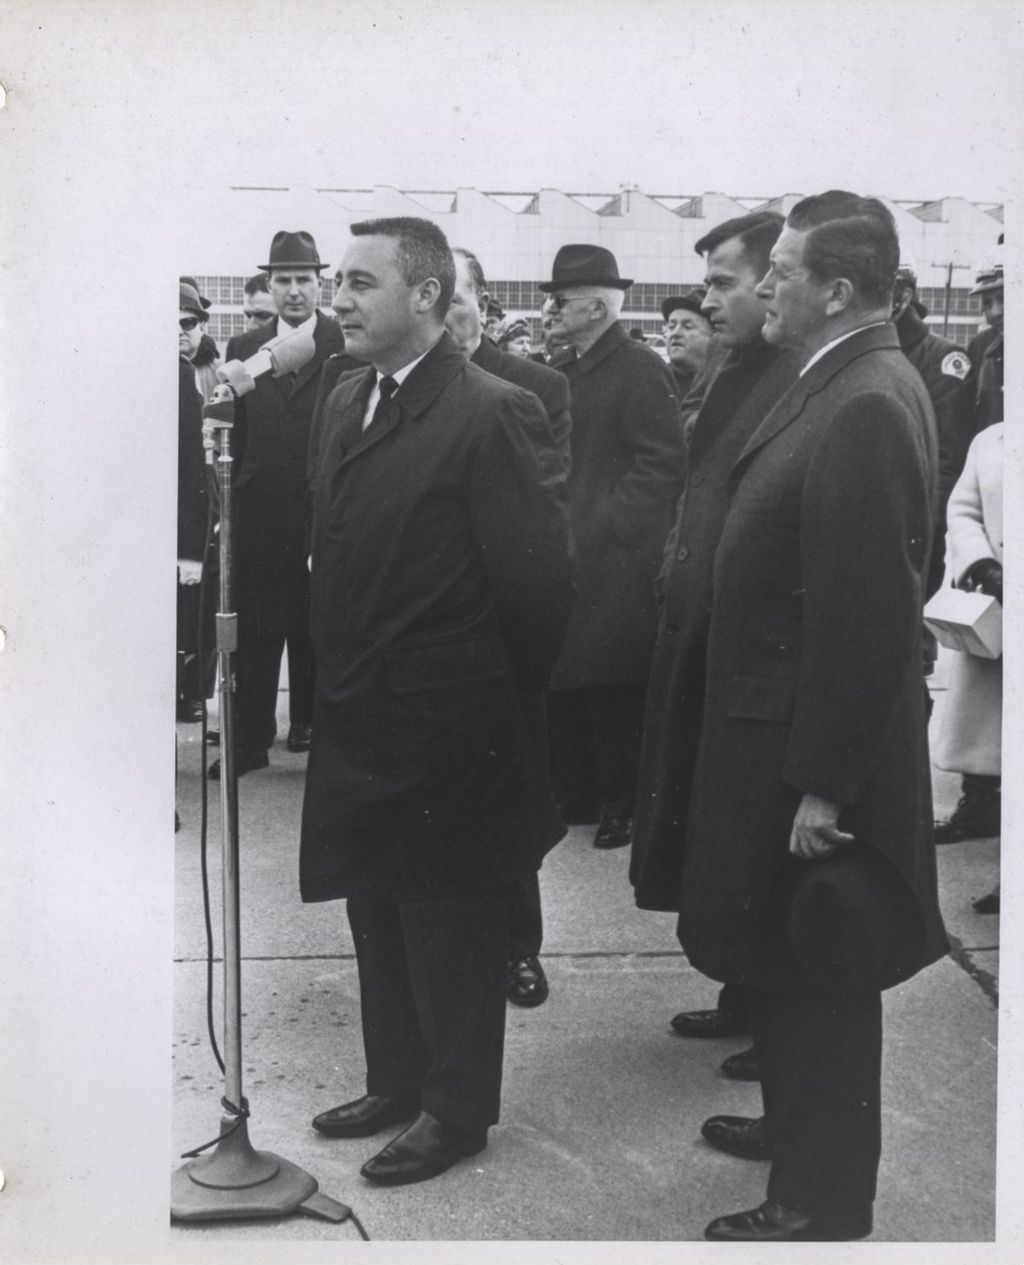 Miniature of Gus Grissom speaking at the airport